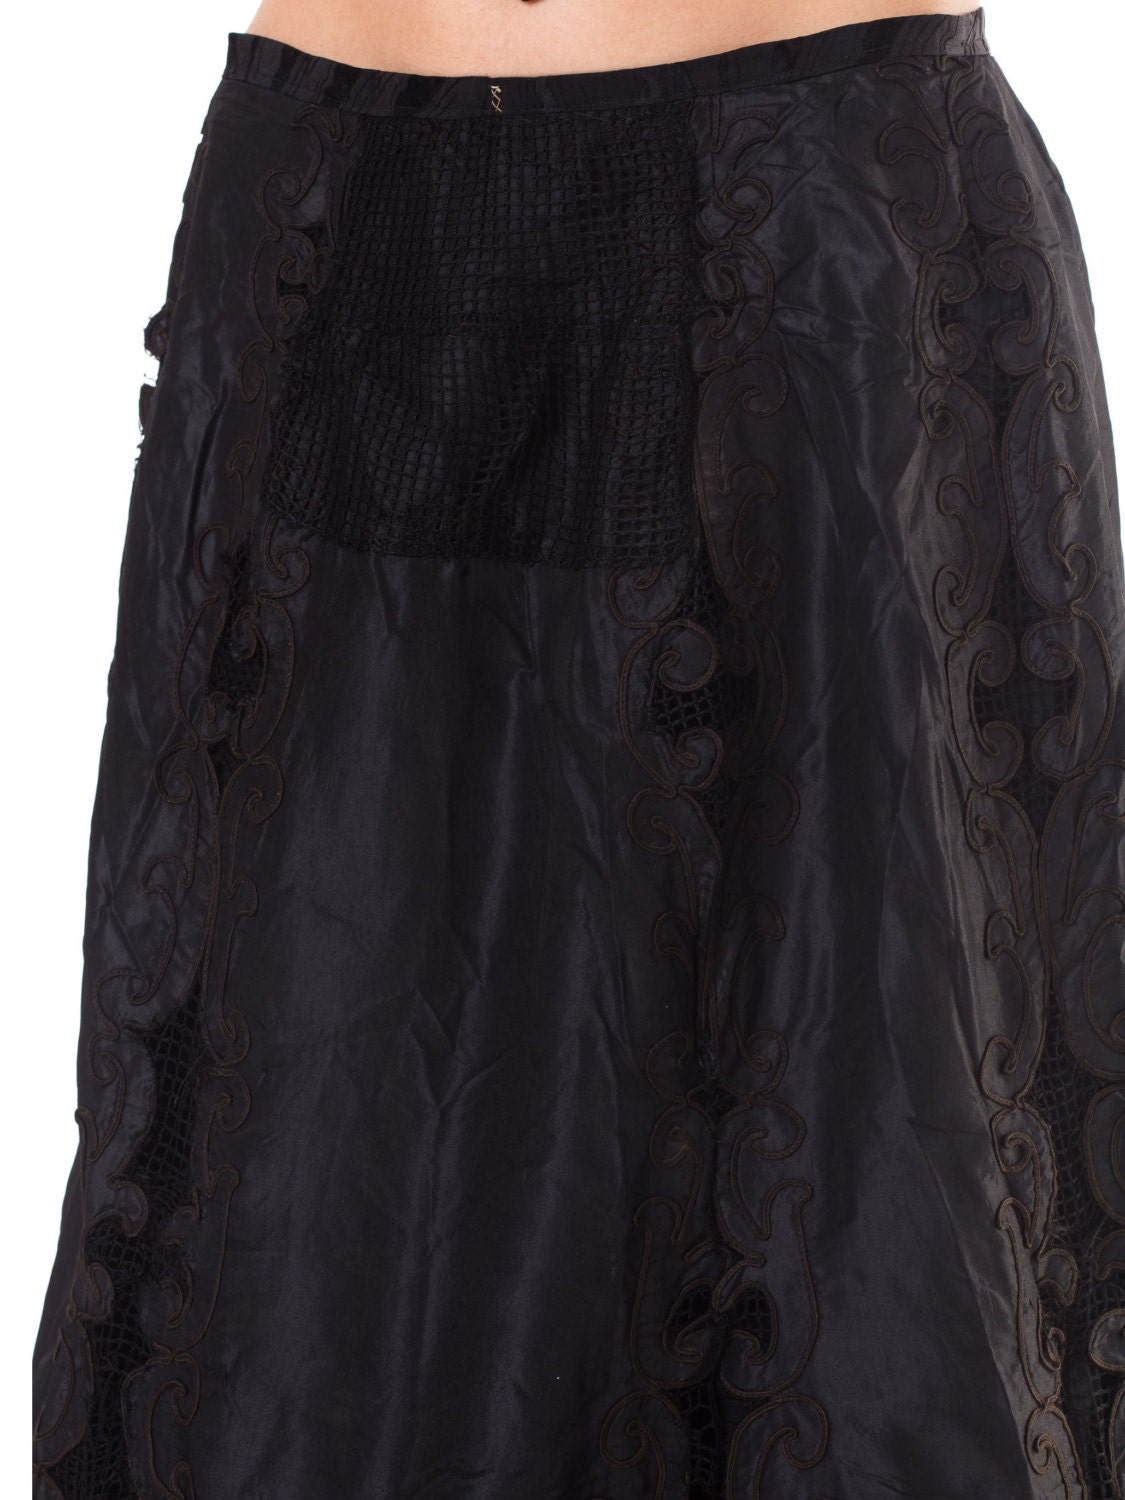 1800S Black Victorian Silk & Lace Tiered Skirt With Appliqués - Etsy